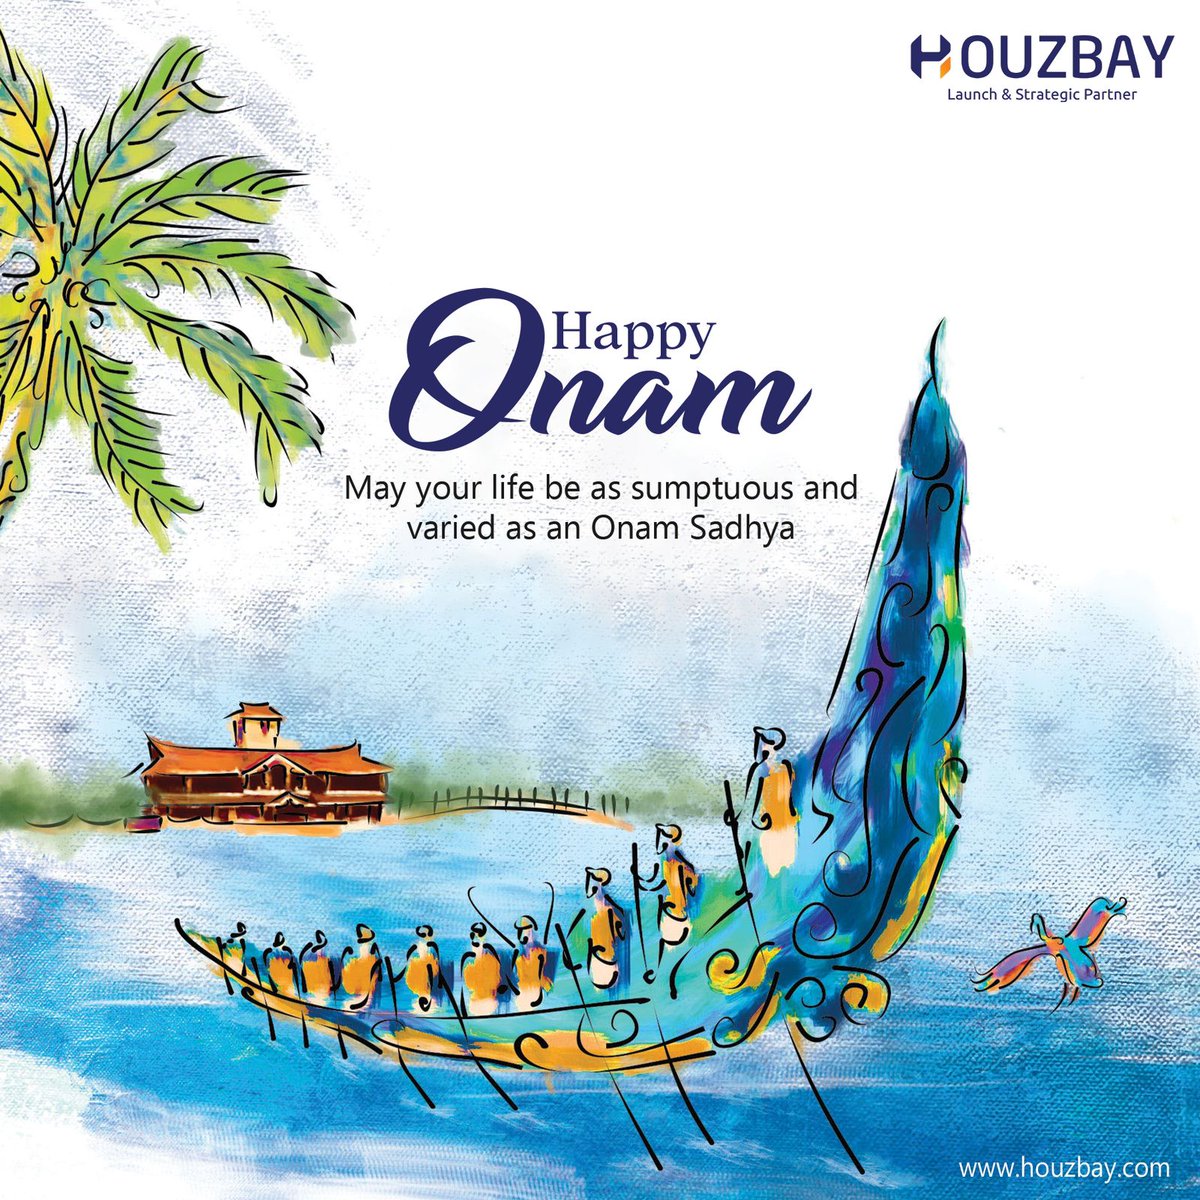 Overflowing plates and overflowing blessings! May this Onam bring you both in abundance.

Wishing you a communal and delightful Onam!

#Onam2023 #PropertyBlessings #OnamintheHouse #Houzbay